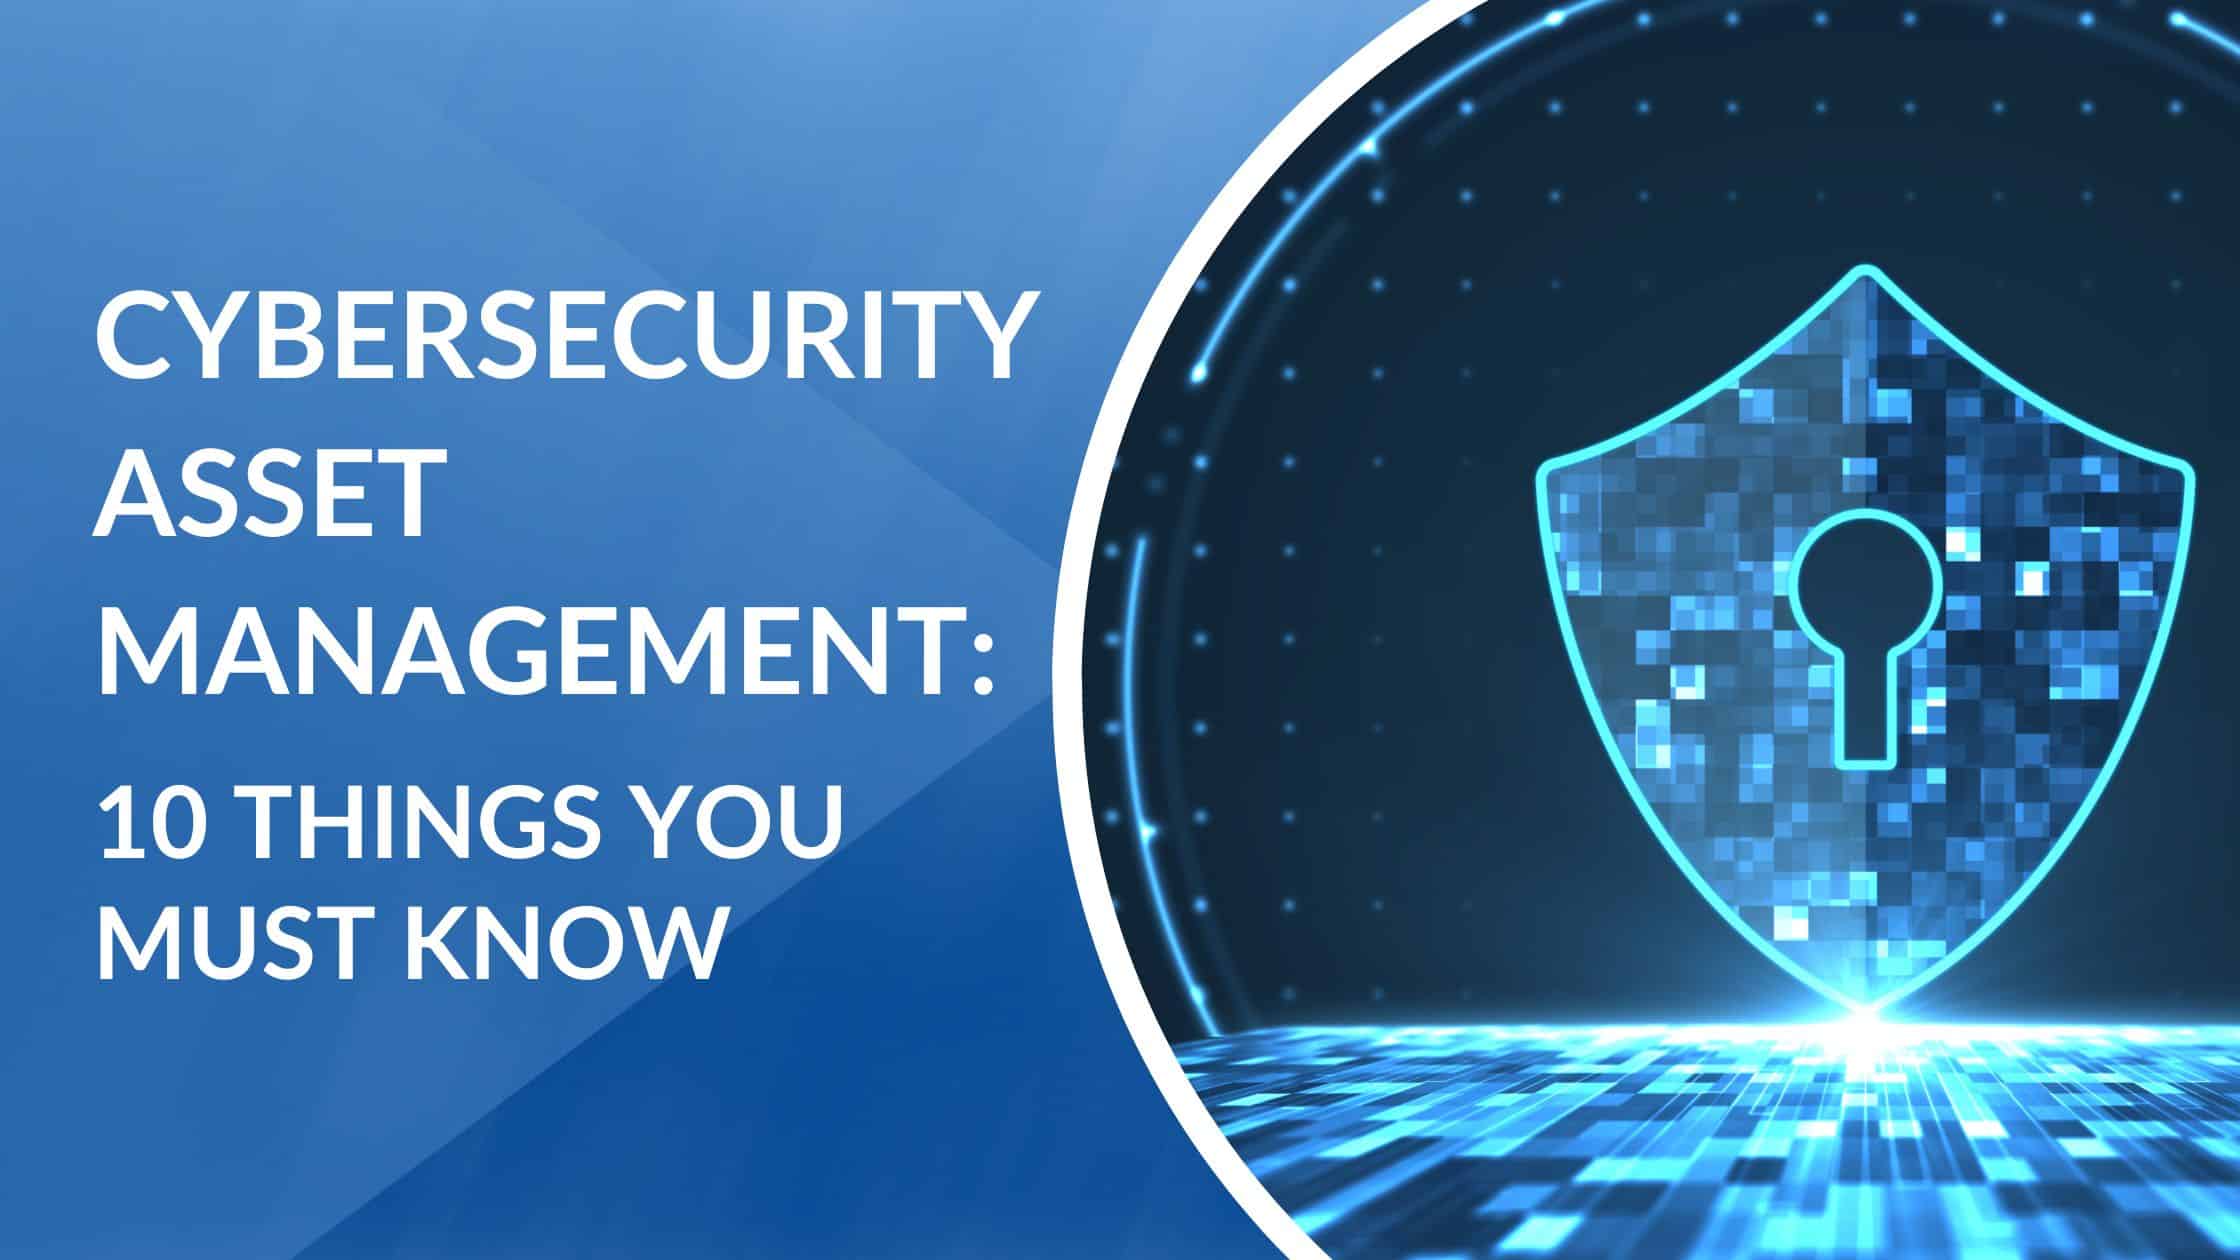 Cybersecurity asset management 10 things you must know